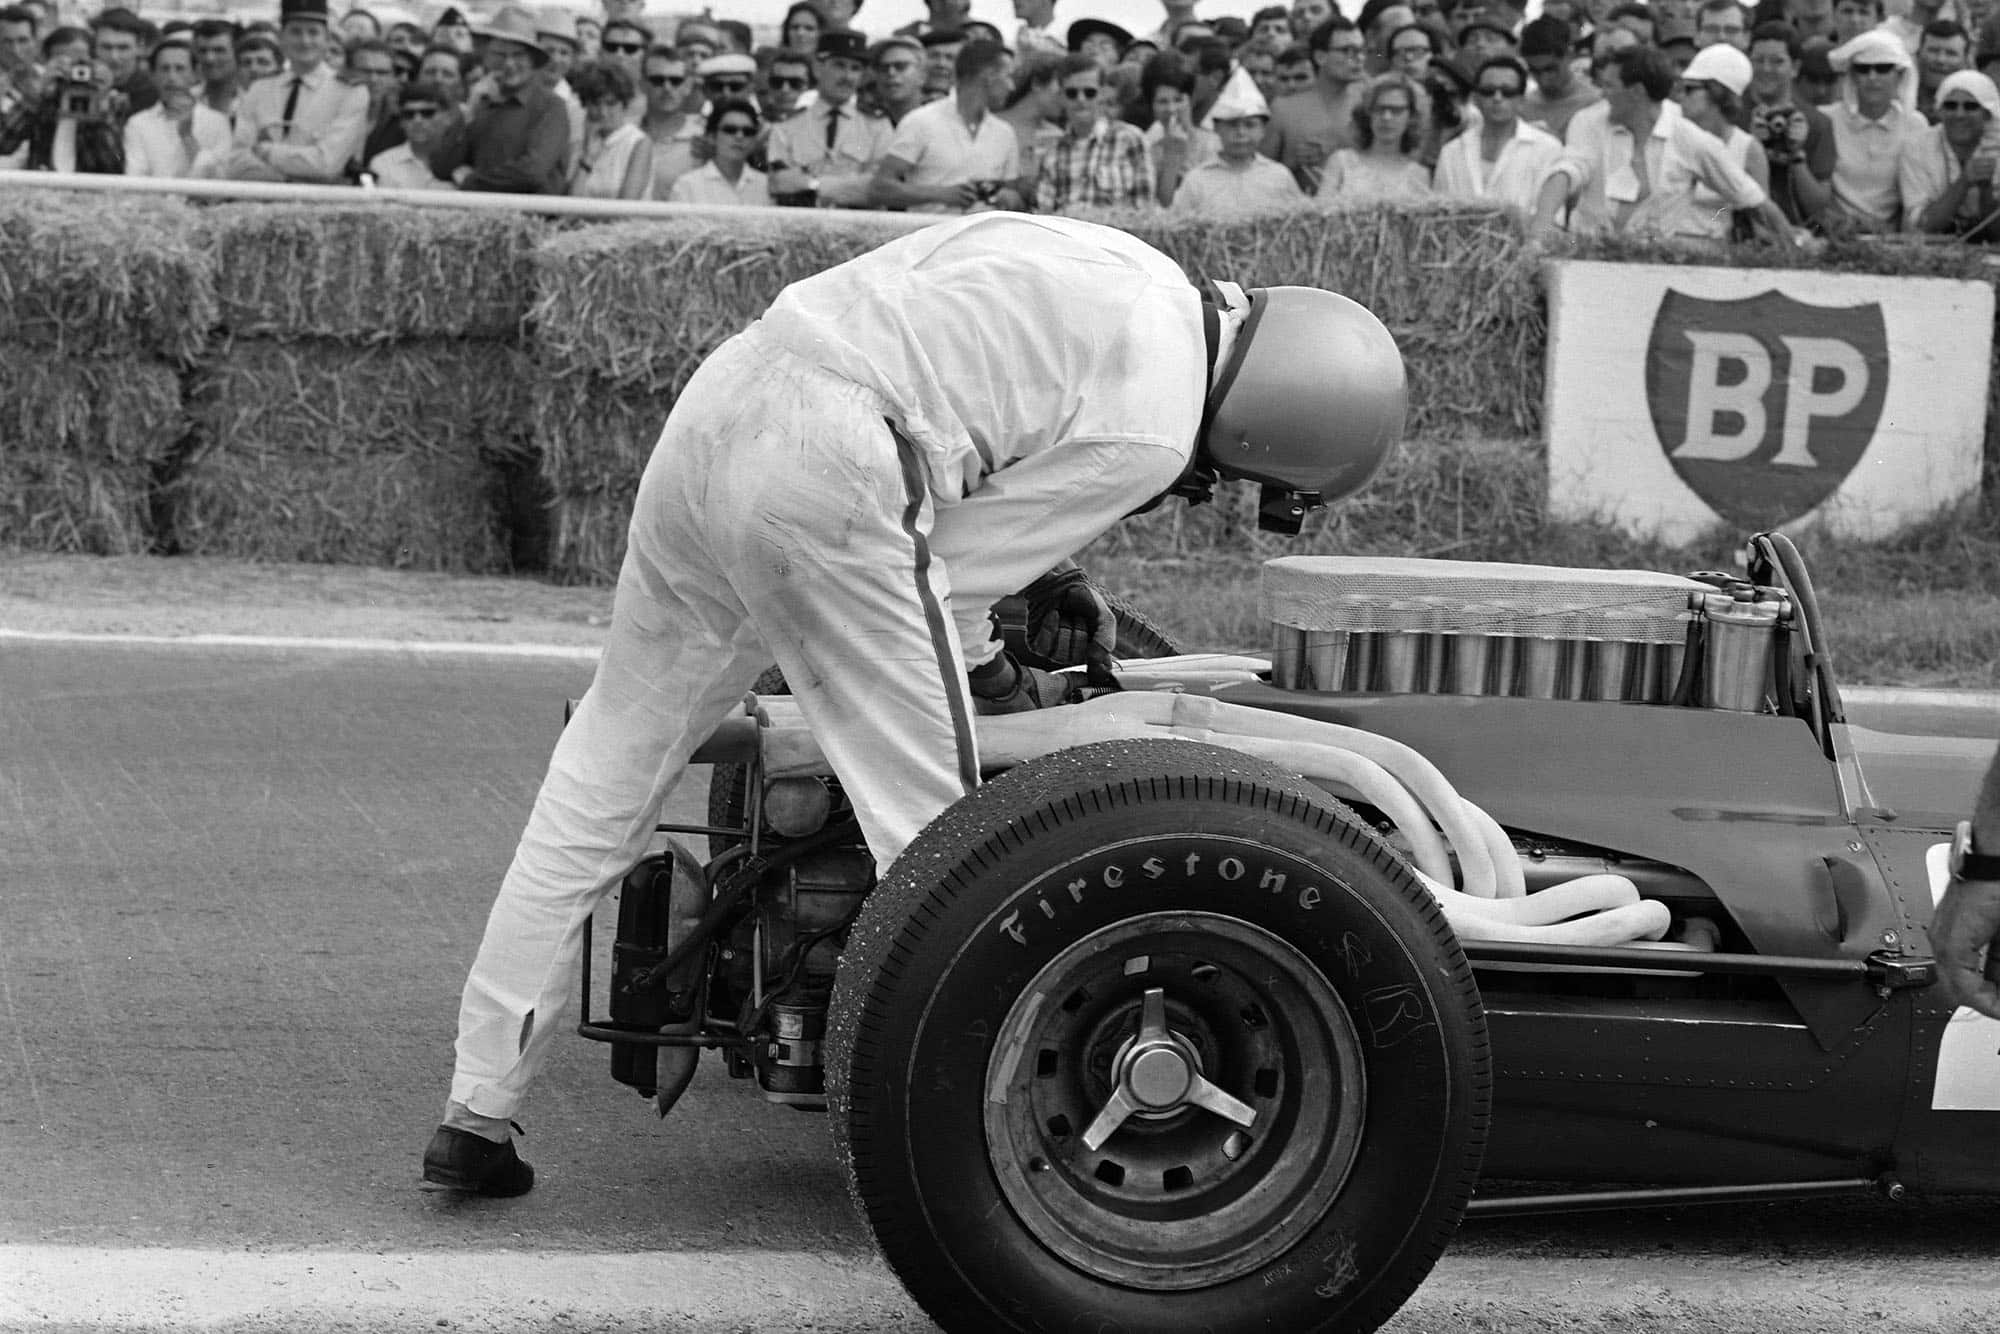 After suffering a throttle issue, Lorenzo Bandini utilises a piece of wire from a hay bale to attach to the engine and get him back to the pit lane.